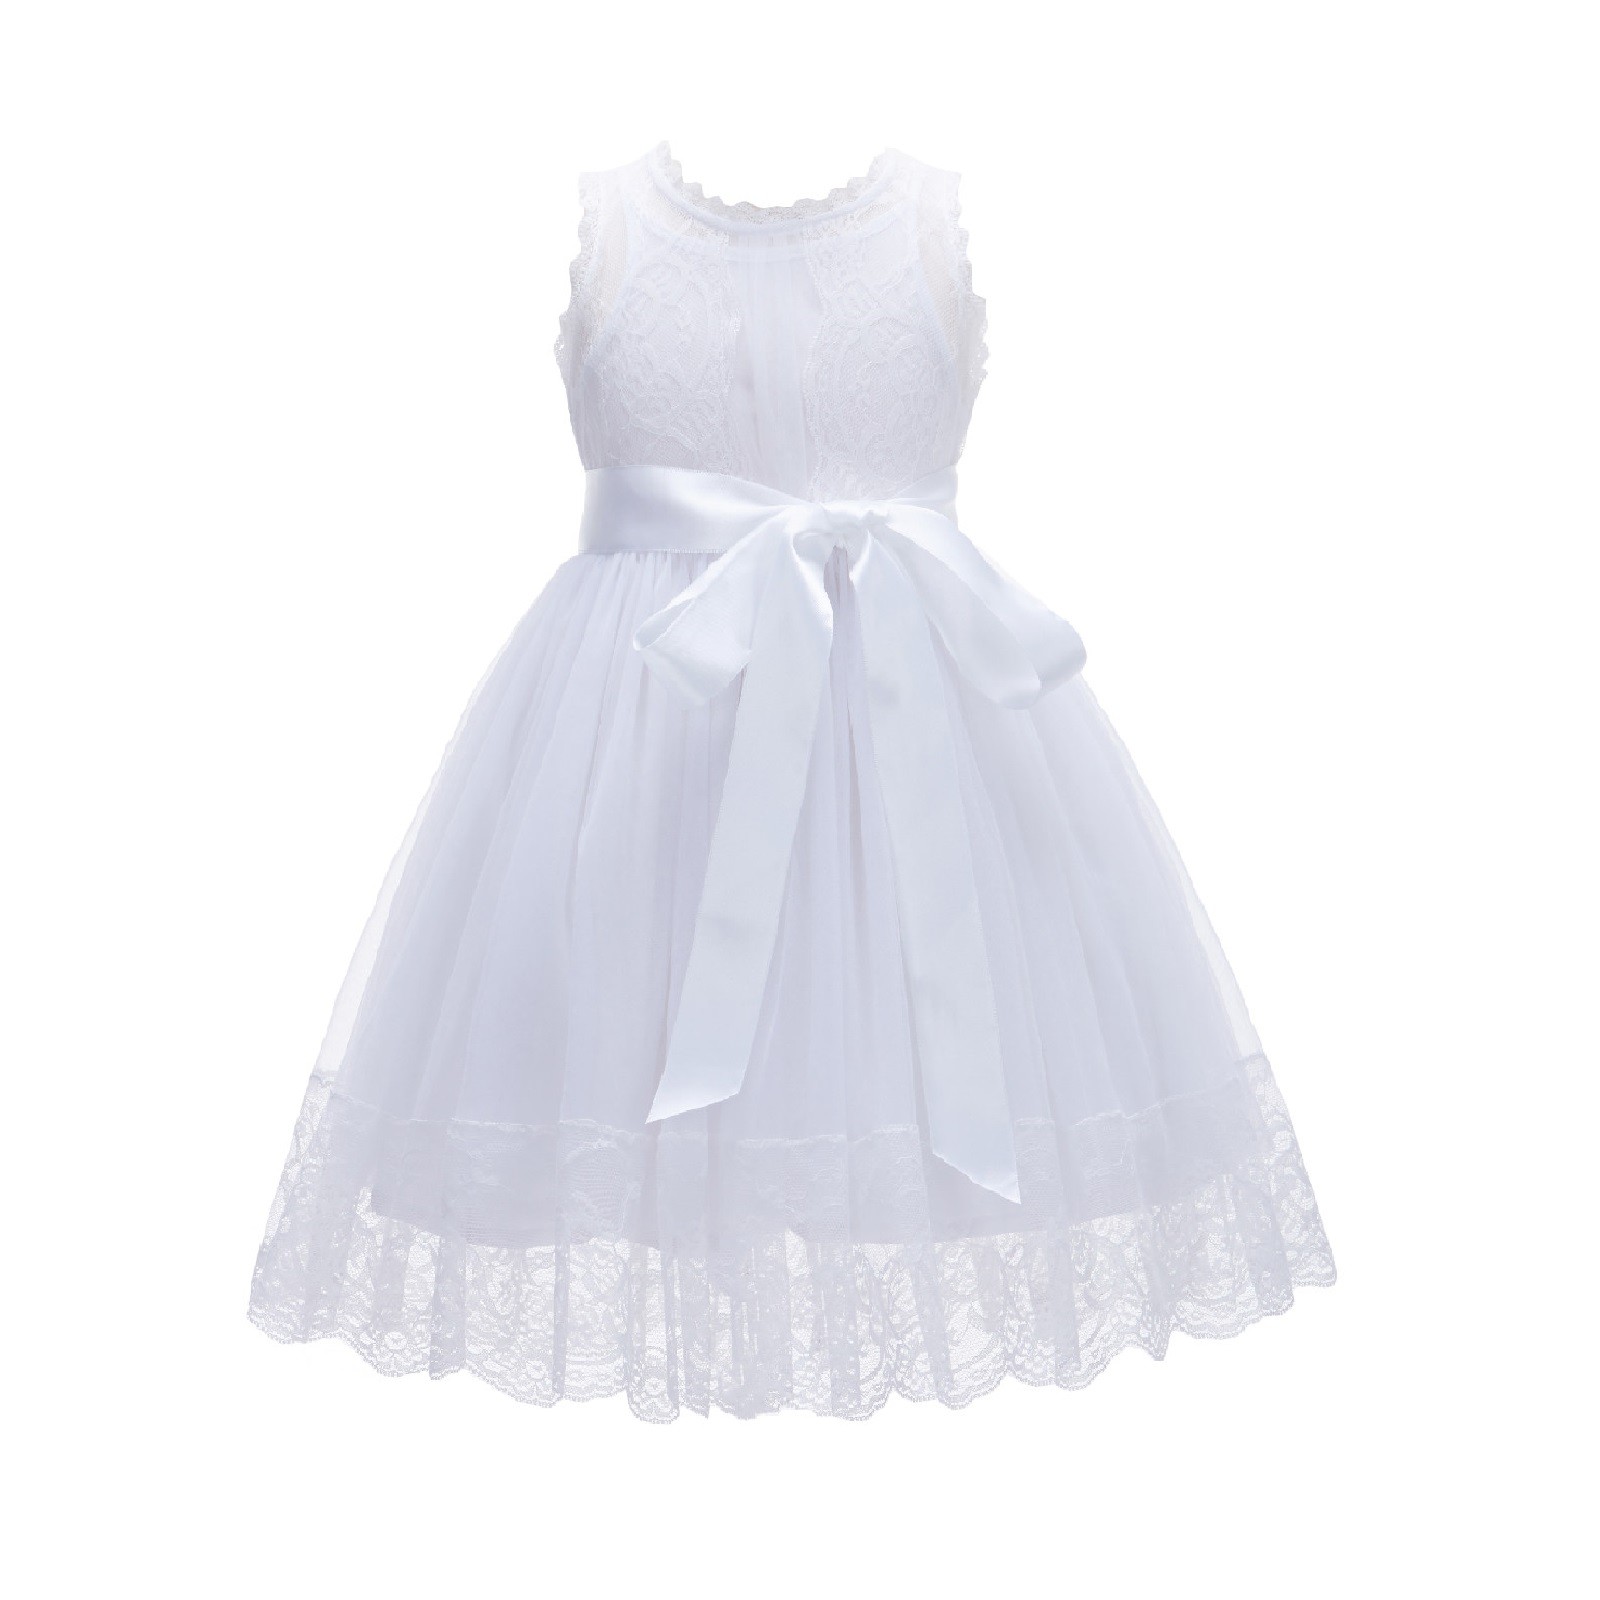 White Cotton Floral Lace Overlay Flower Girl Dress 169R